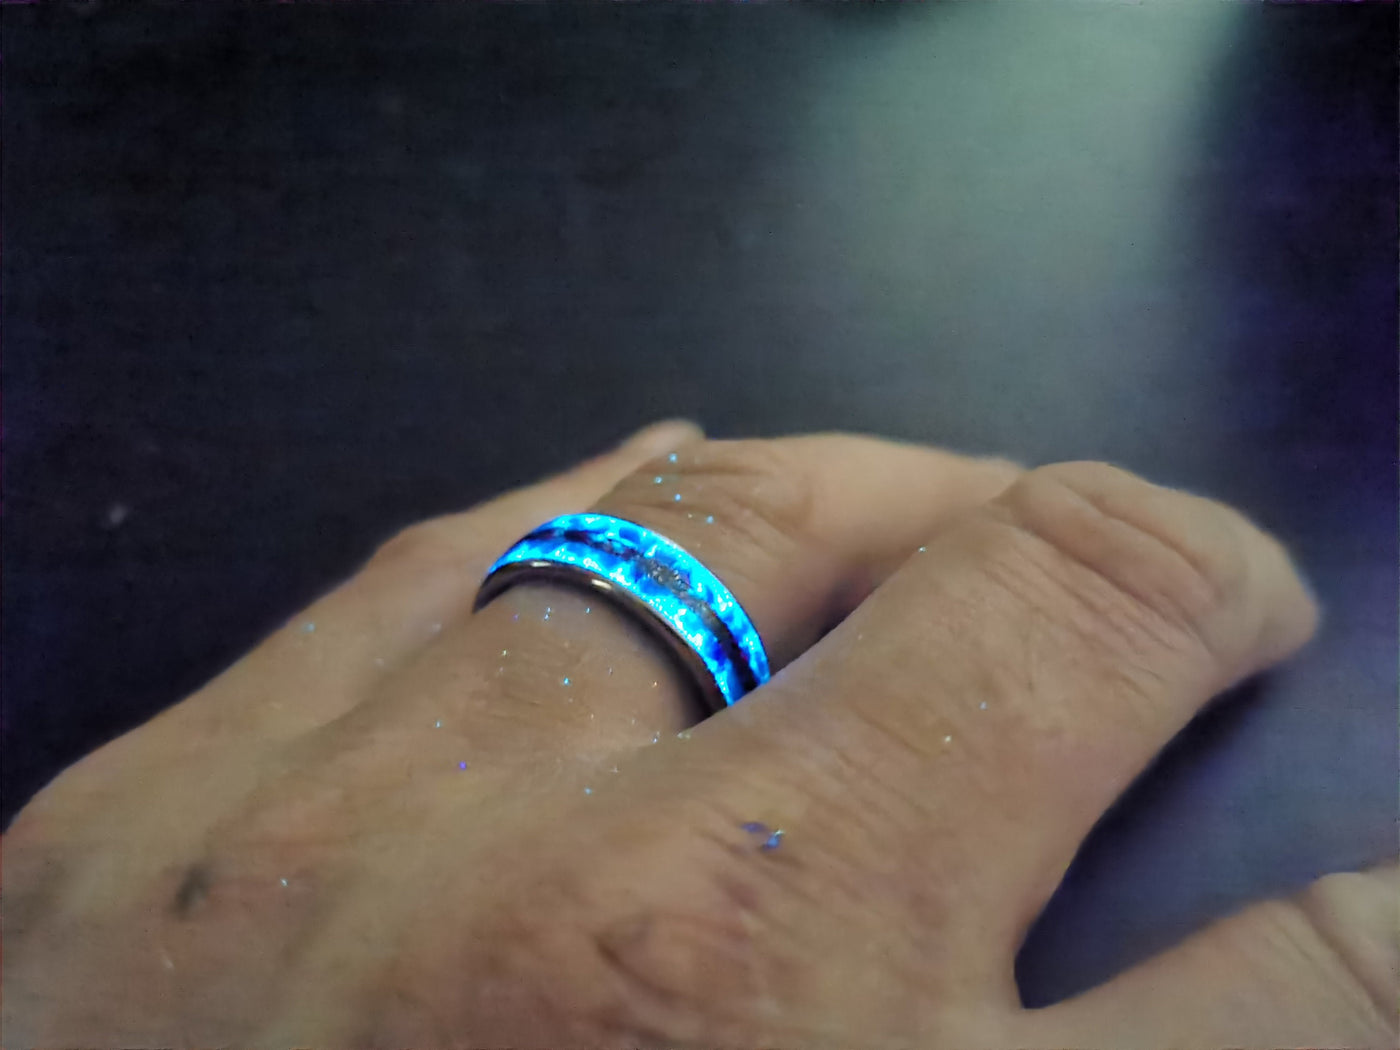 Blue opal ring with meteorite inlay.